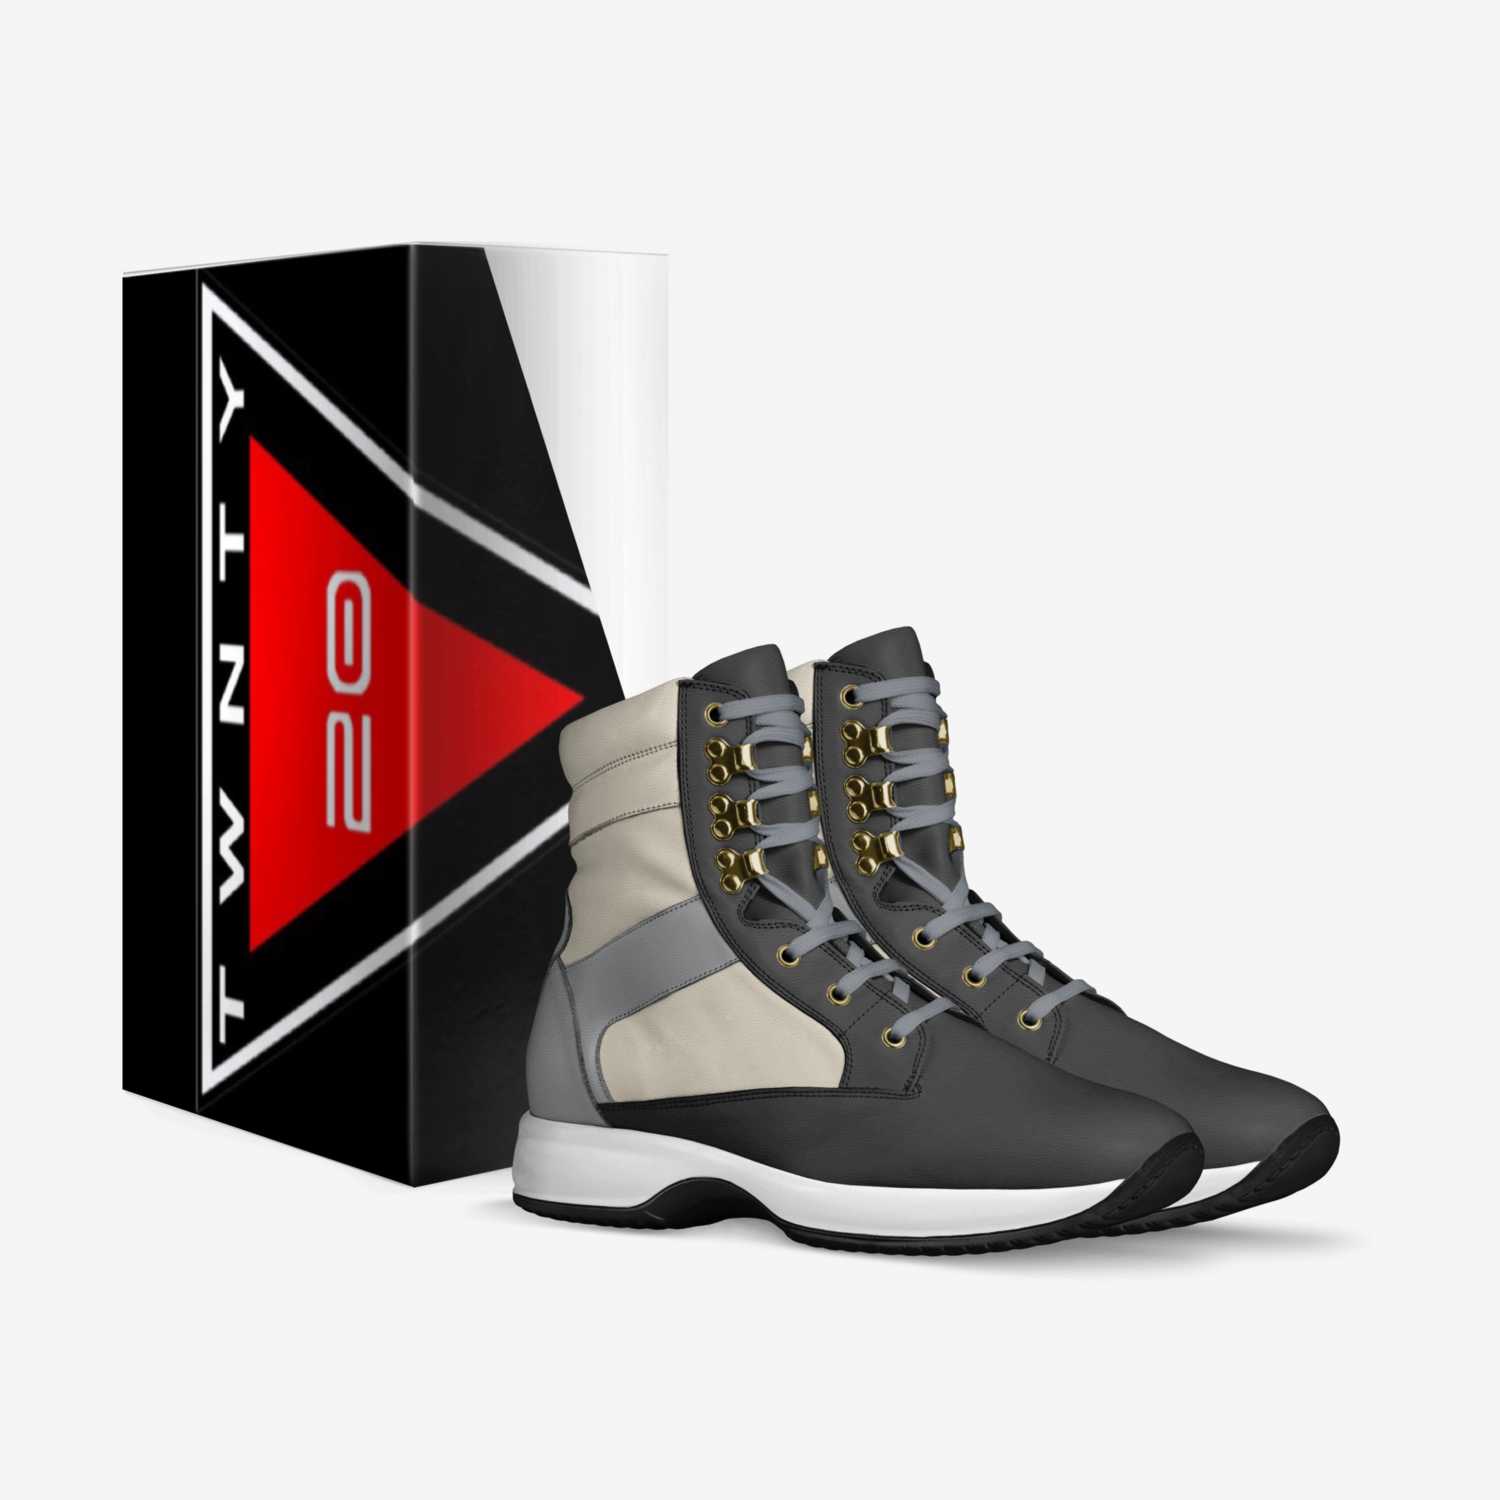 LXR 520 custom made in Italy shoes by Kvn Elvn | Box view